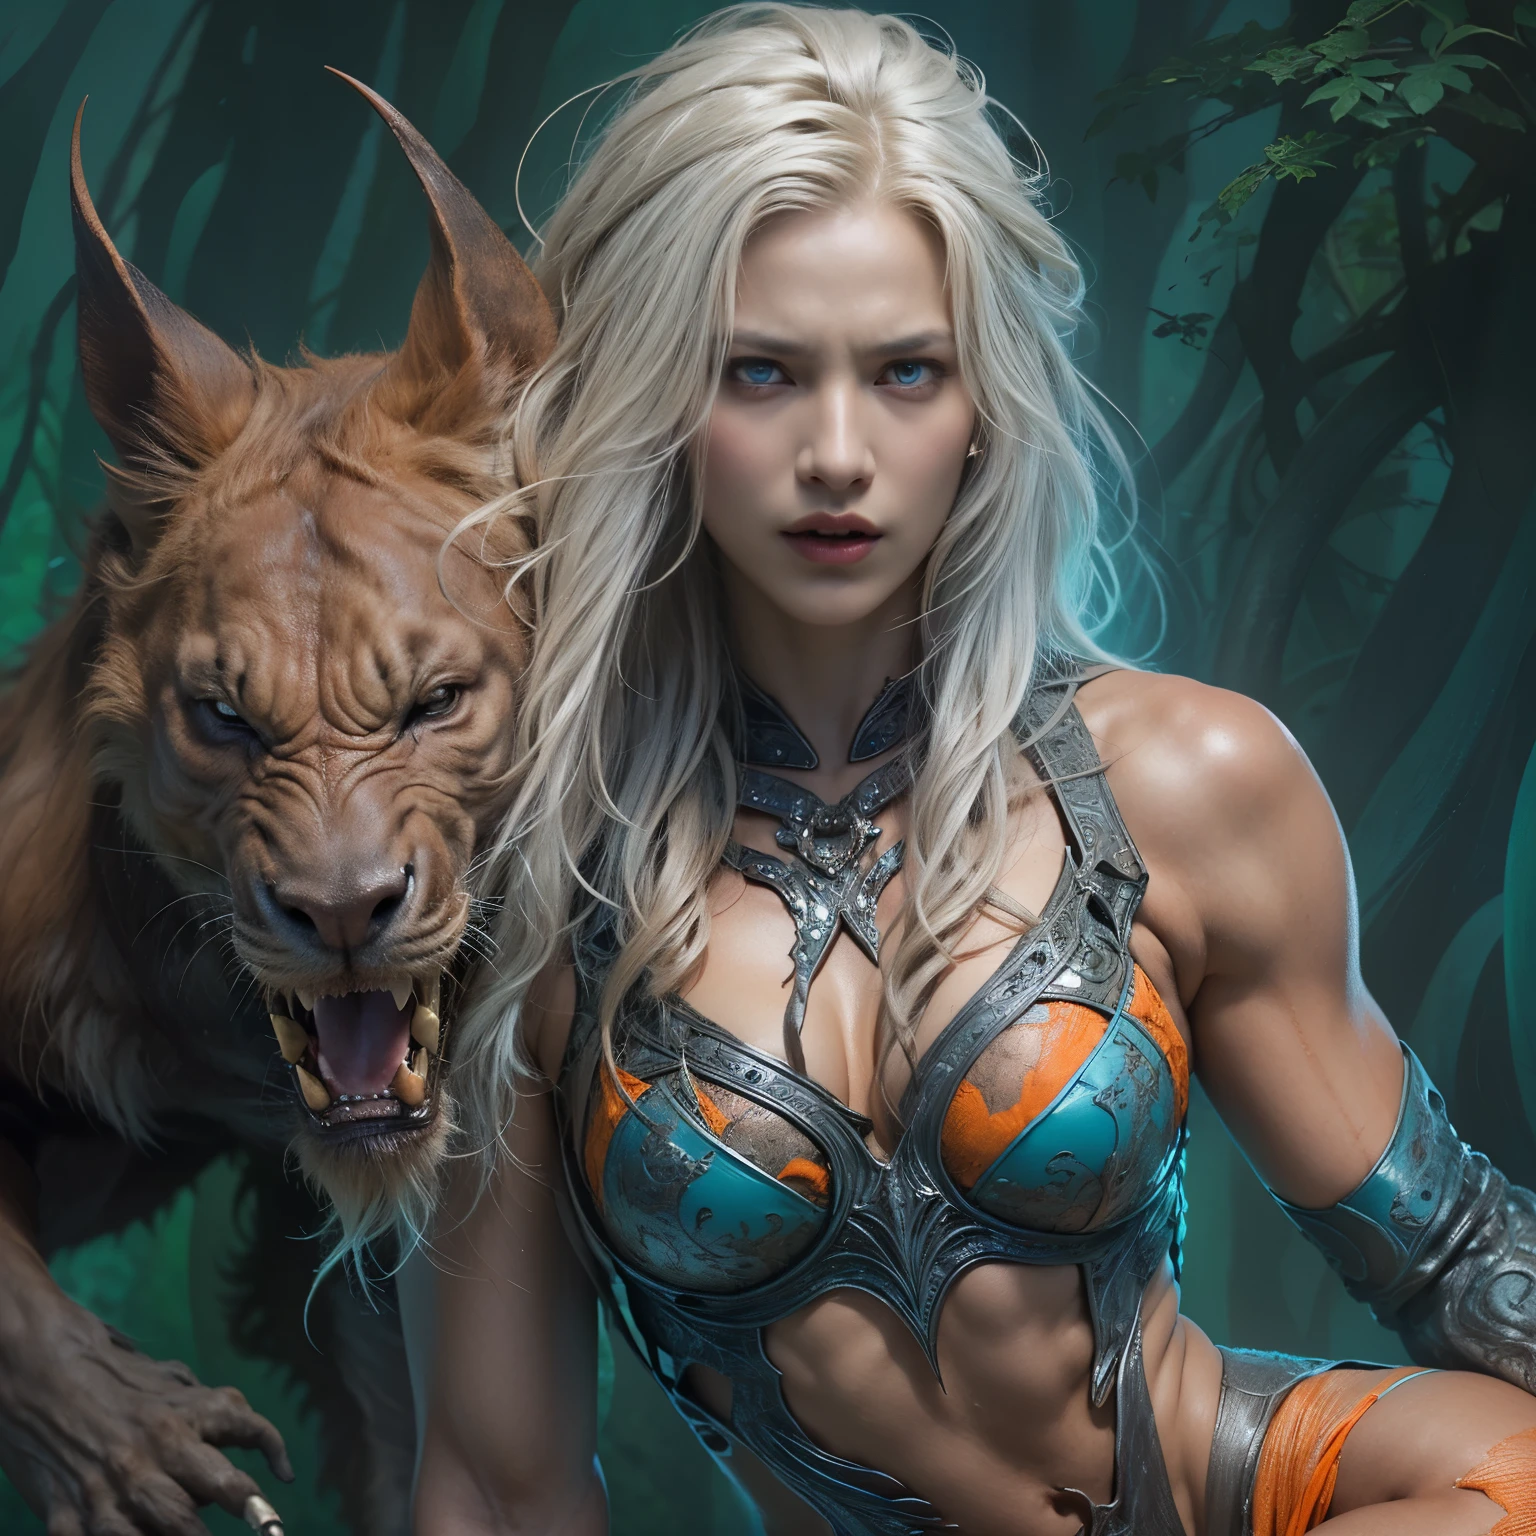 1 female alien, The predator, (extremely beautiful:1.2), (intense gaze:1.4), (predator:1.1), long dark claws, (NSFW:0.8), nipples, thick eyebrows, (shine orange blue eyes:1.5), the most beautiful face in the universe, NSFW, platinum blonde hair,
intricate artwork, ultra realistic realism, high resolution, High freshness, drawing faithfully, official art, Unity 8K Wall paper, ultra detailed artistic photography,
A woman predator with an extremely beautiful face, her intense gaze fixed on her prey, a primal force that could not be denied.

(beautiful lean body:1.5), (muscular build:1.2), (prowling:1.3), (sleek movements:1.4)

Her beautiful body, muscular and toned, moved with sleek grace as she prowled, ready to strike at a moment's notice. The predator within her was always on